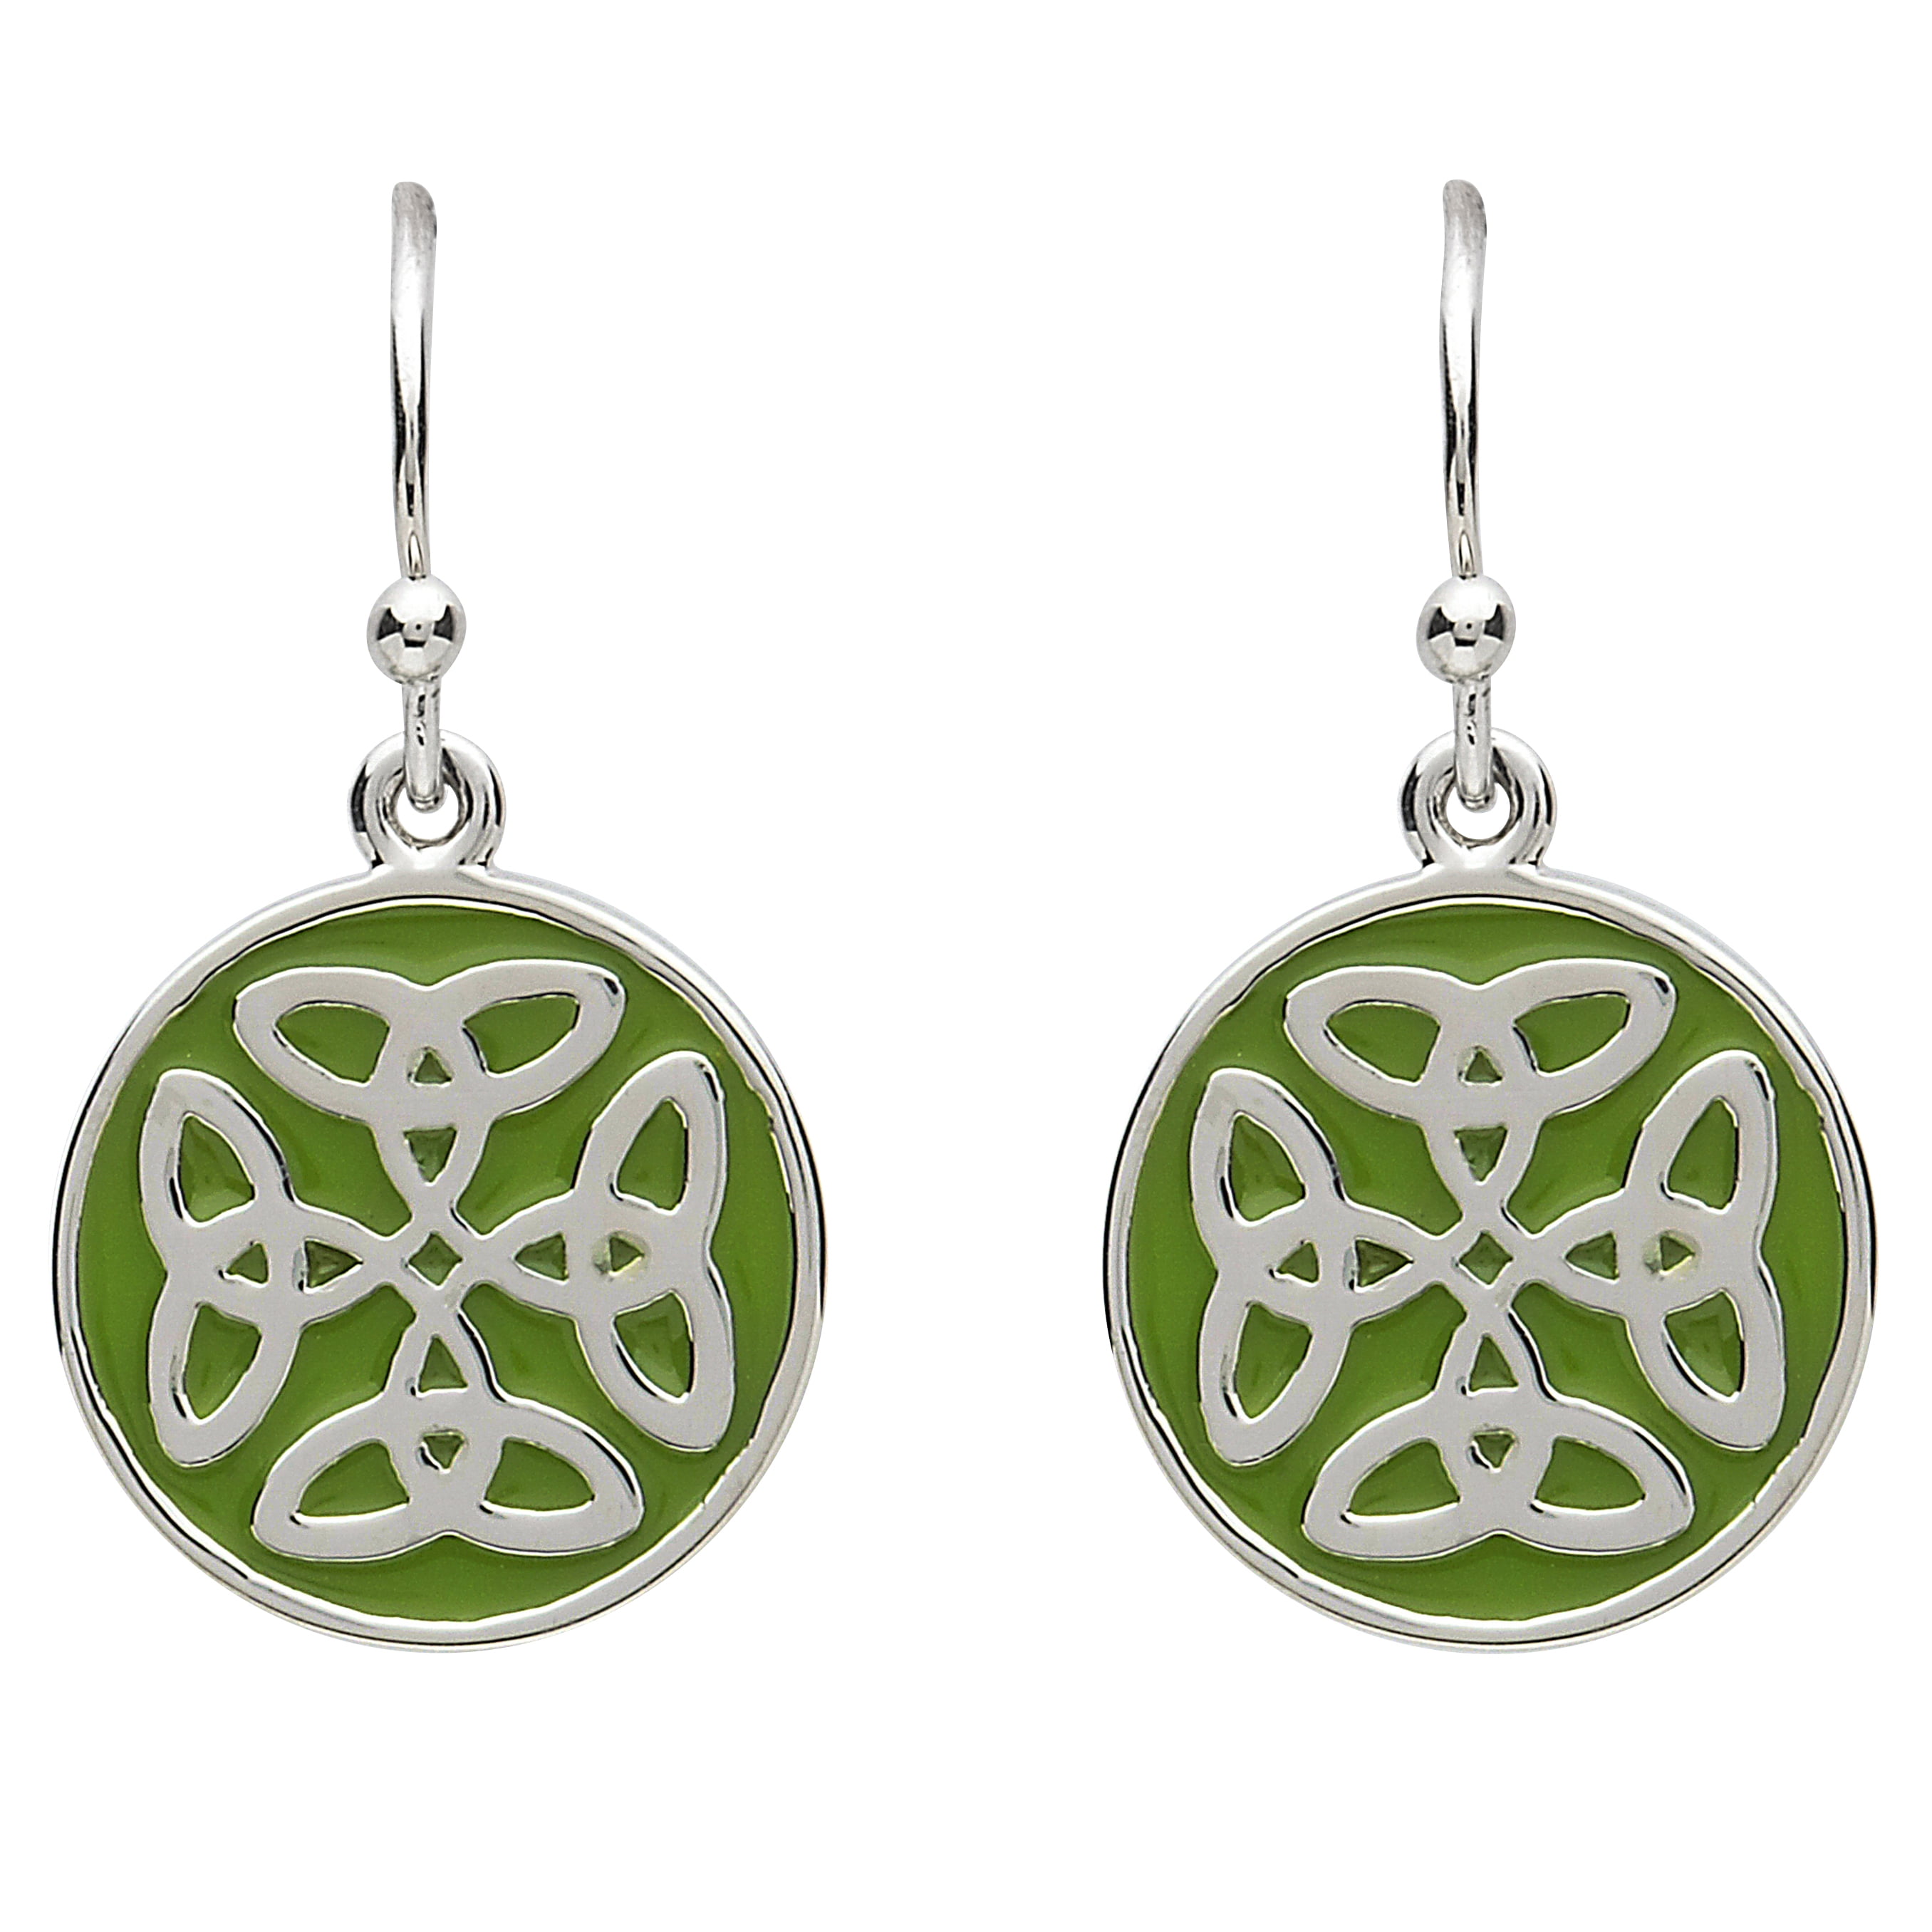 Shanore Platinum Plated Drop Celtic Trinity Knot Earrings with Hook Closure 